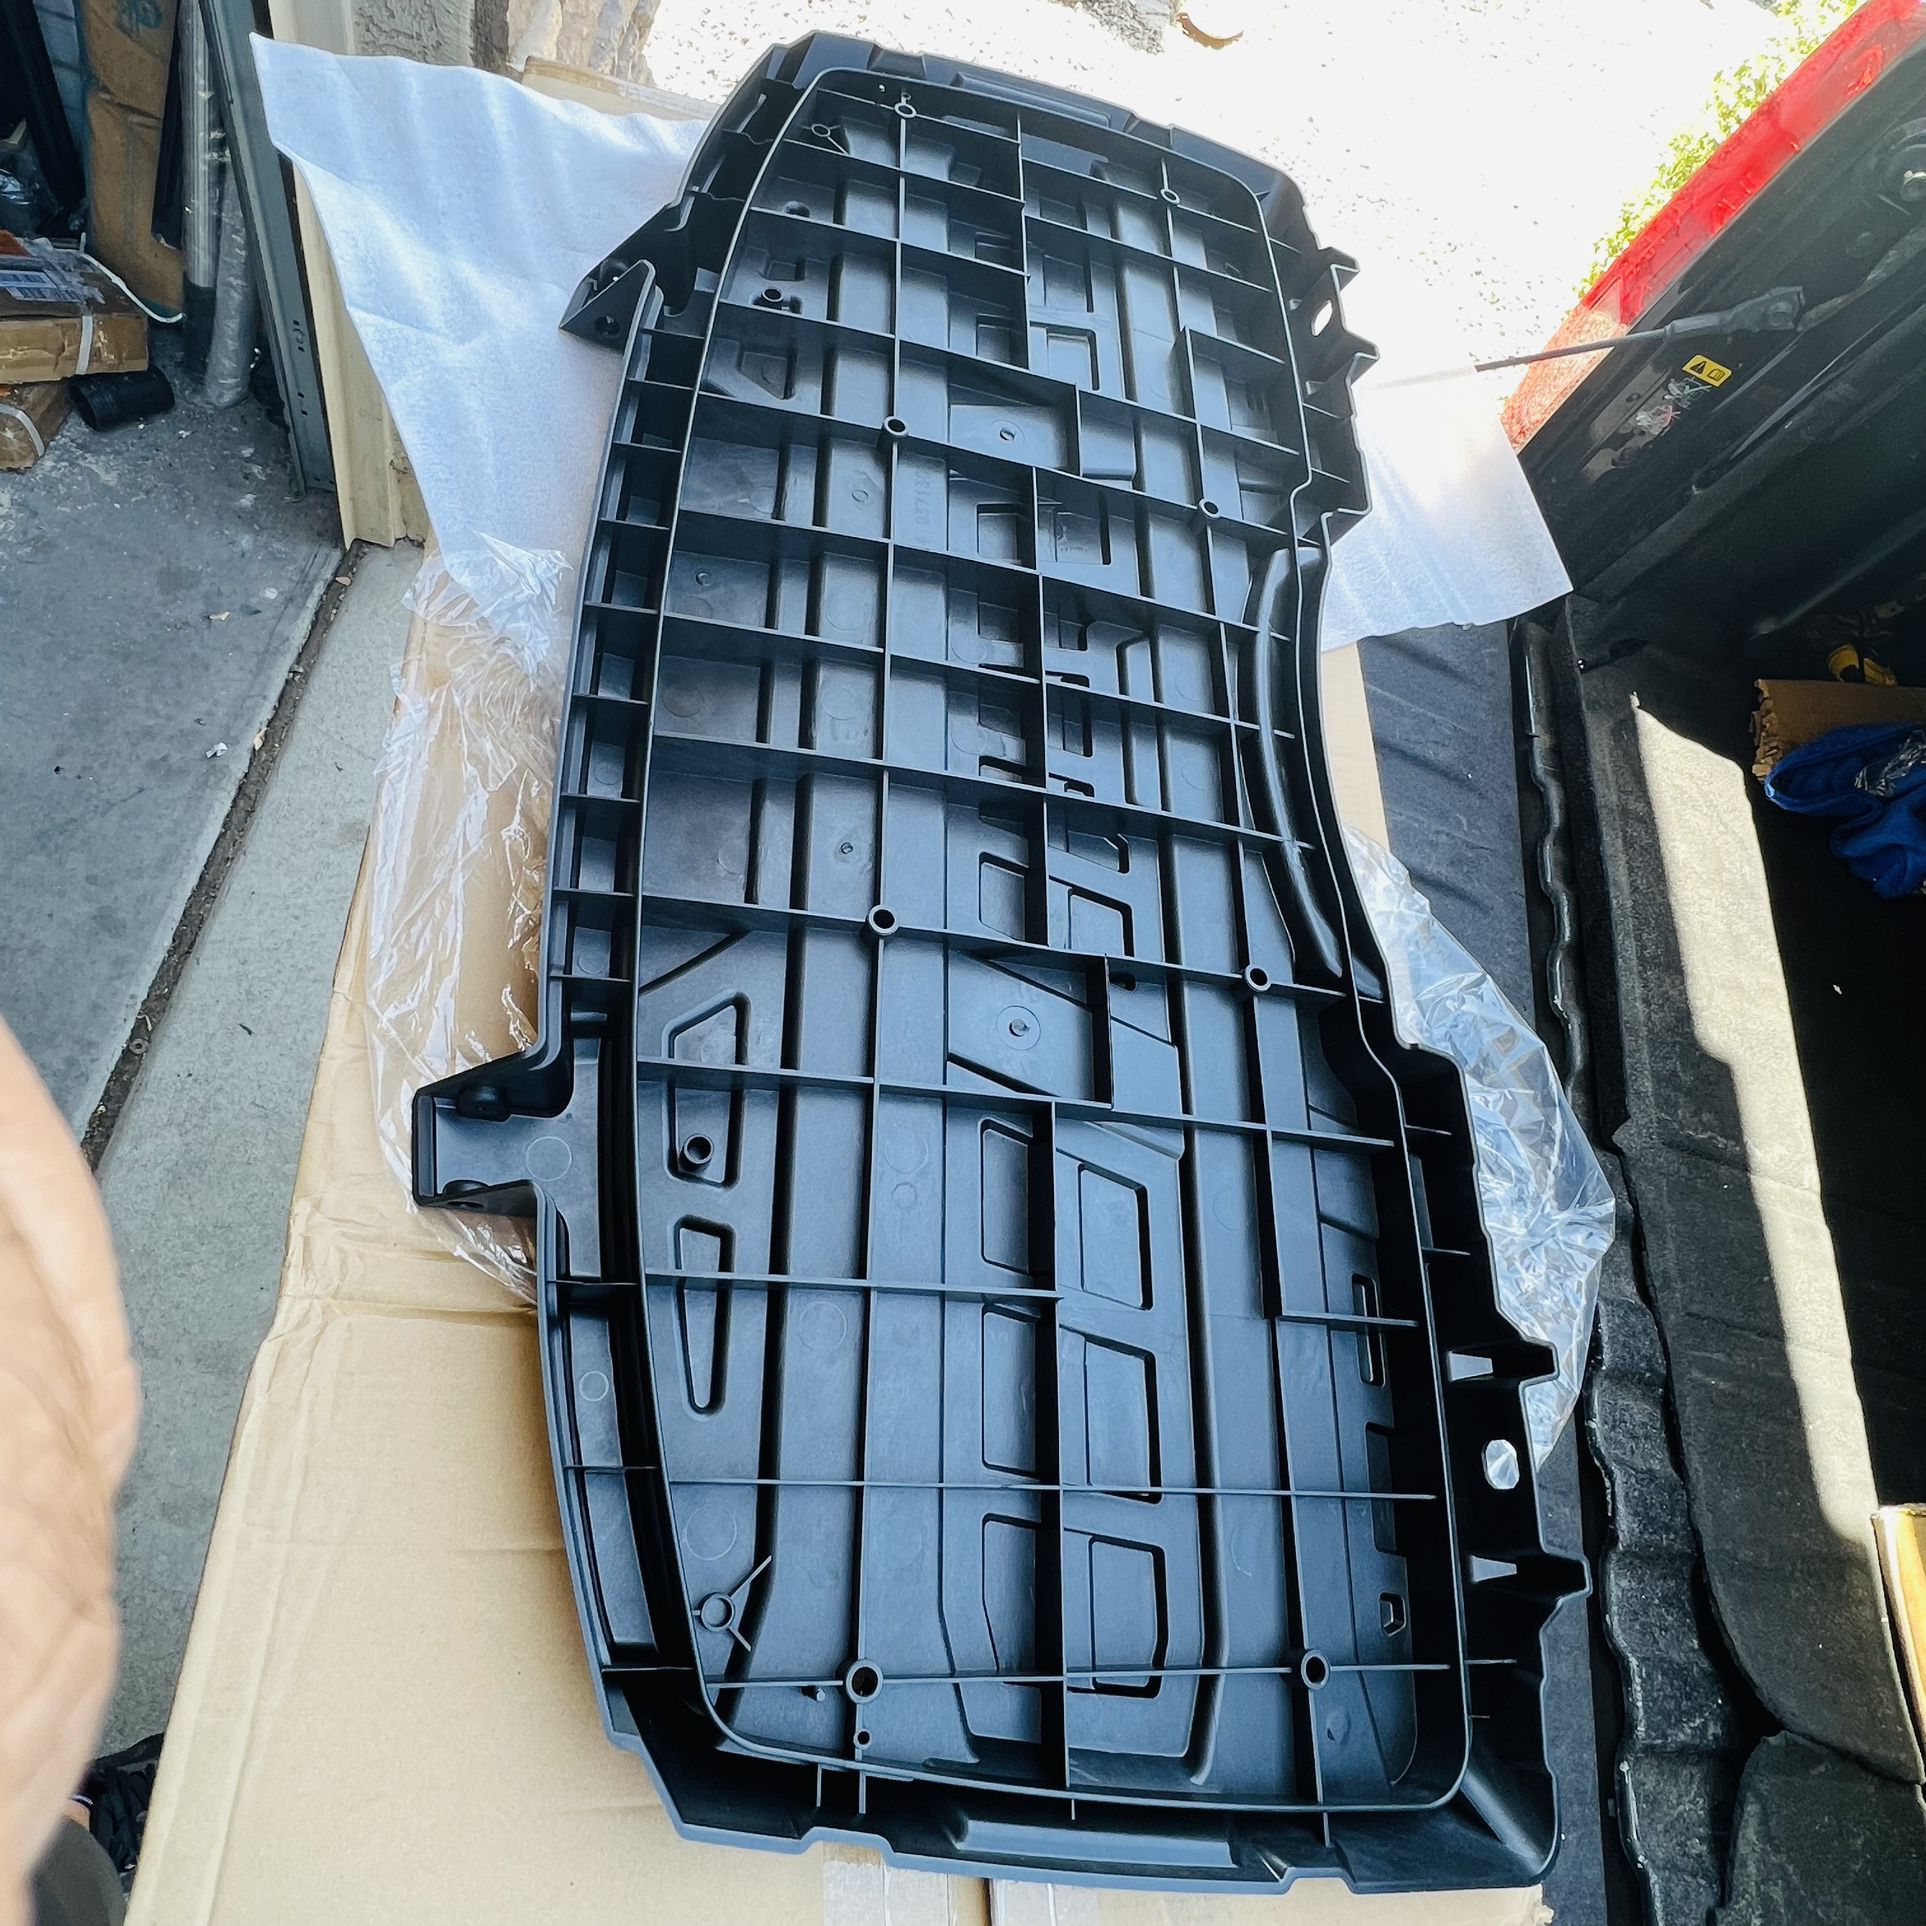 Polaris ATV Front Service Cover Assembly, Genuine OEM Part (contact info  removed), Qty for Sale in Glendale, AZ OfferUp